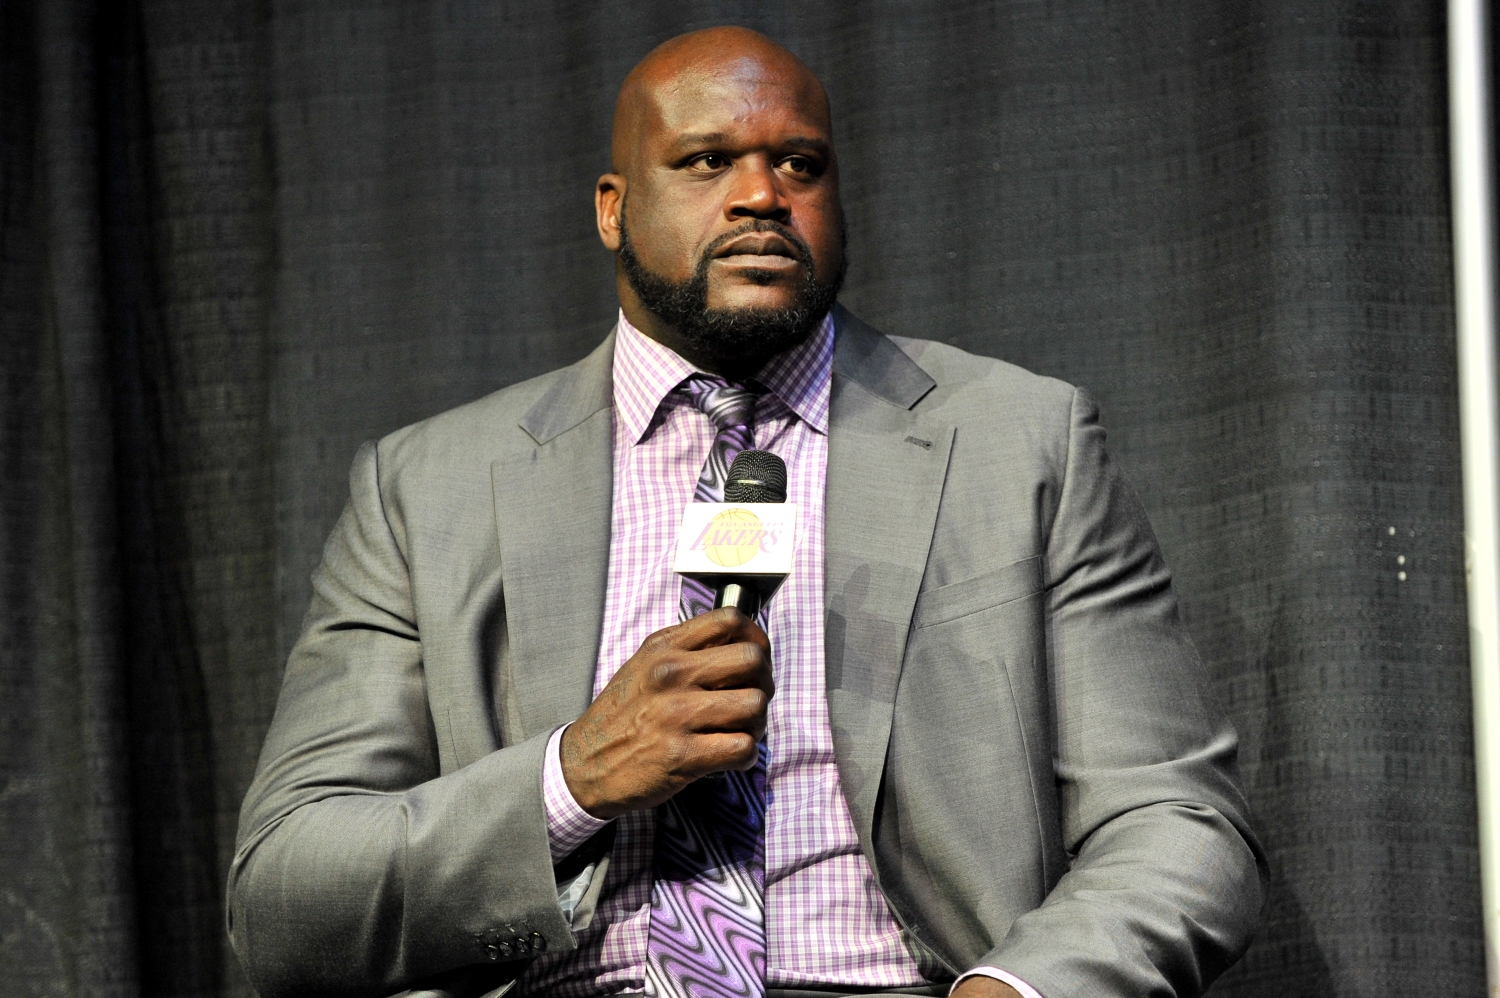 Former NBA star Shaquille O'Neal speaks during a Lakers event at the Staples Center.